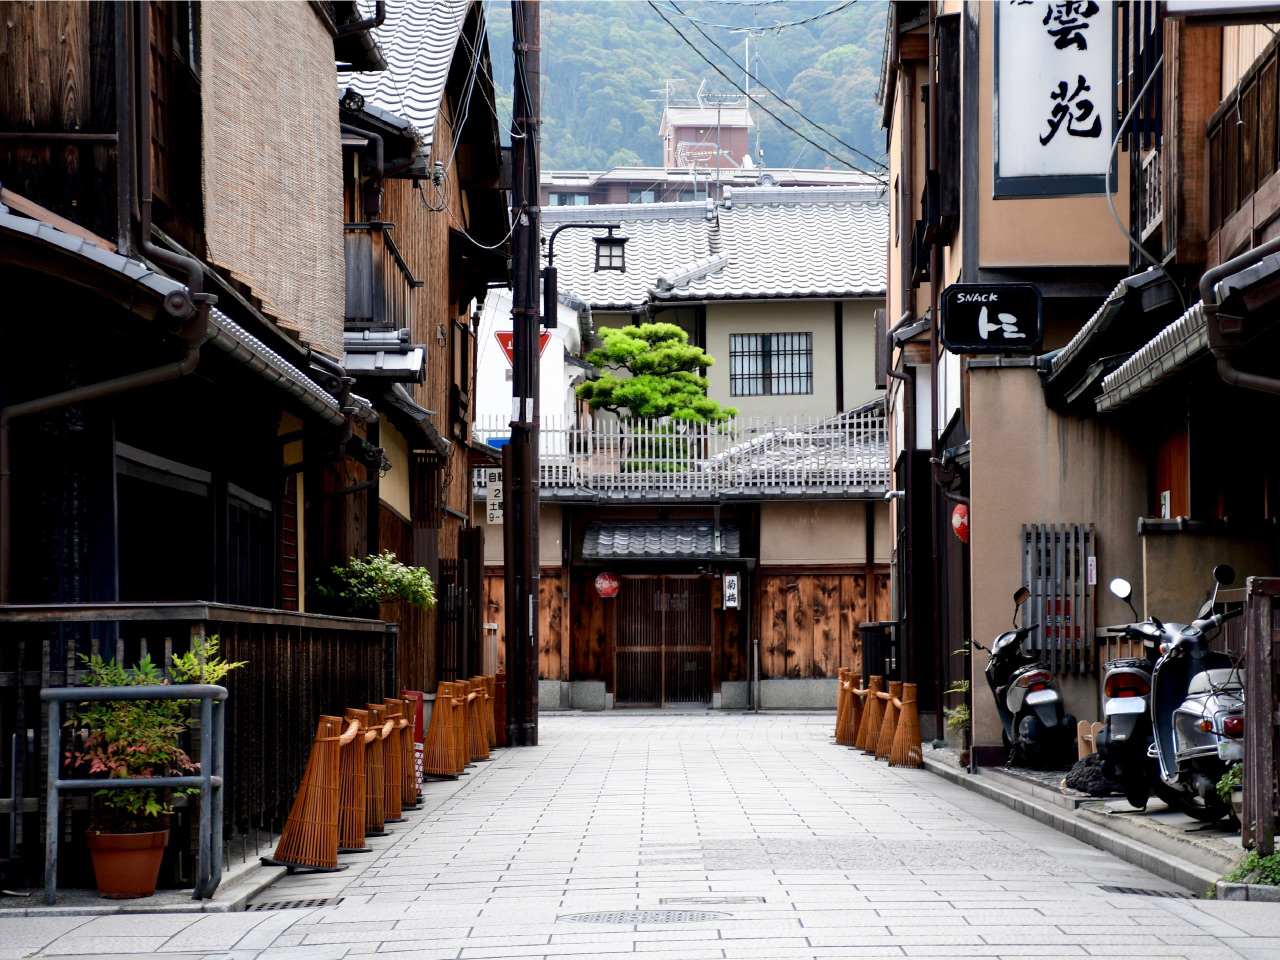 An Early Morning Walk in Gion, Kyoto